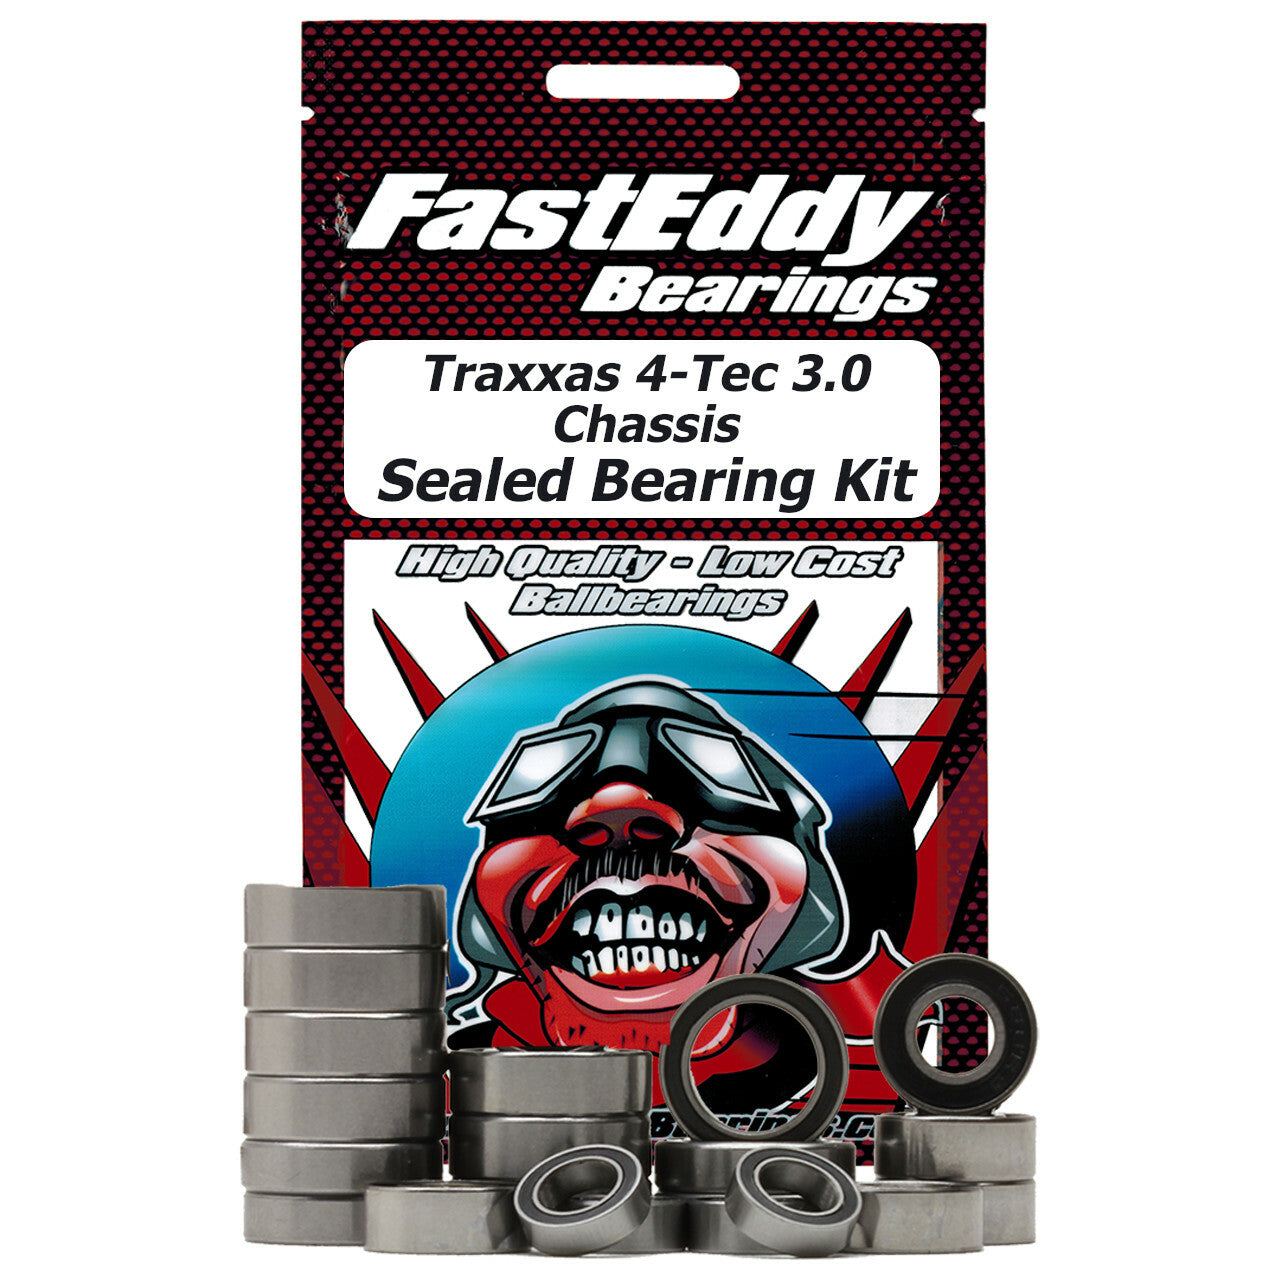 TFE7382 Traxxas 4-Tec 3.0 Chassis Sealed Bearing Kit